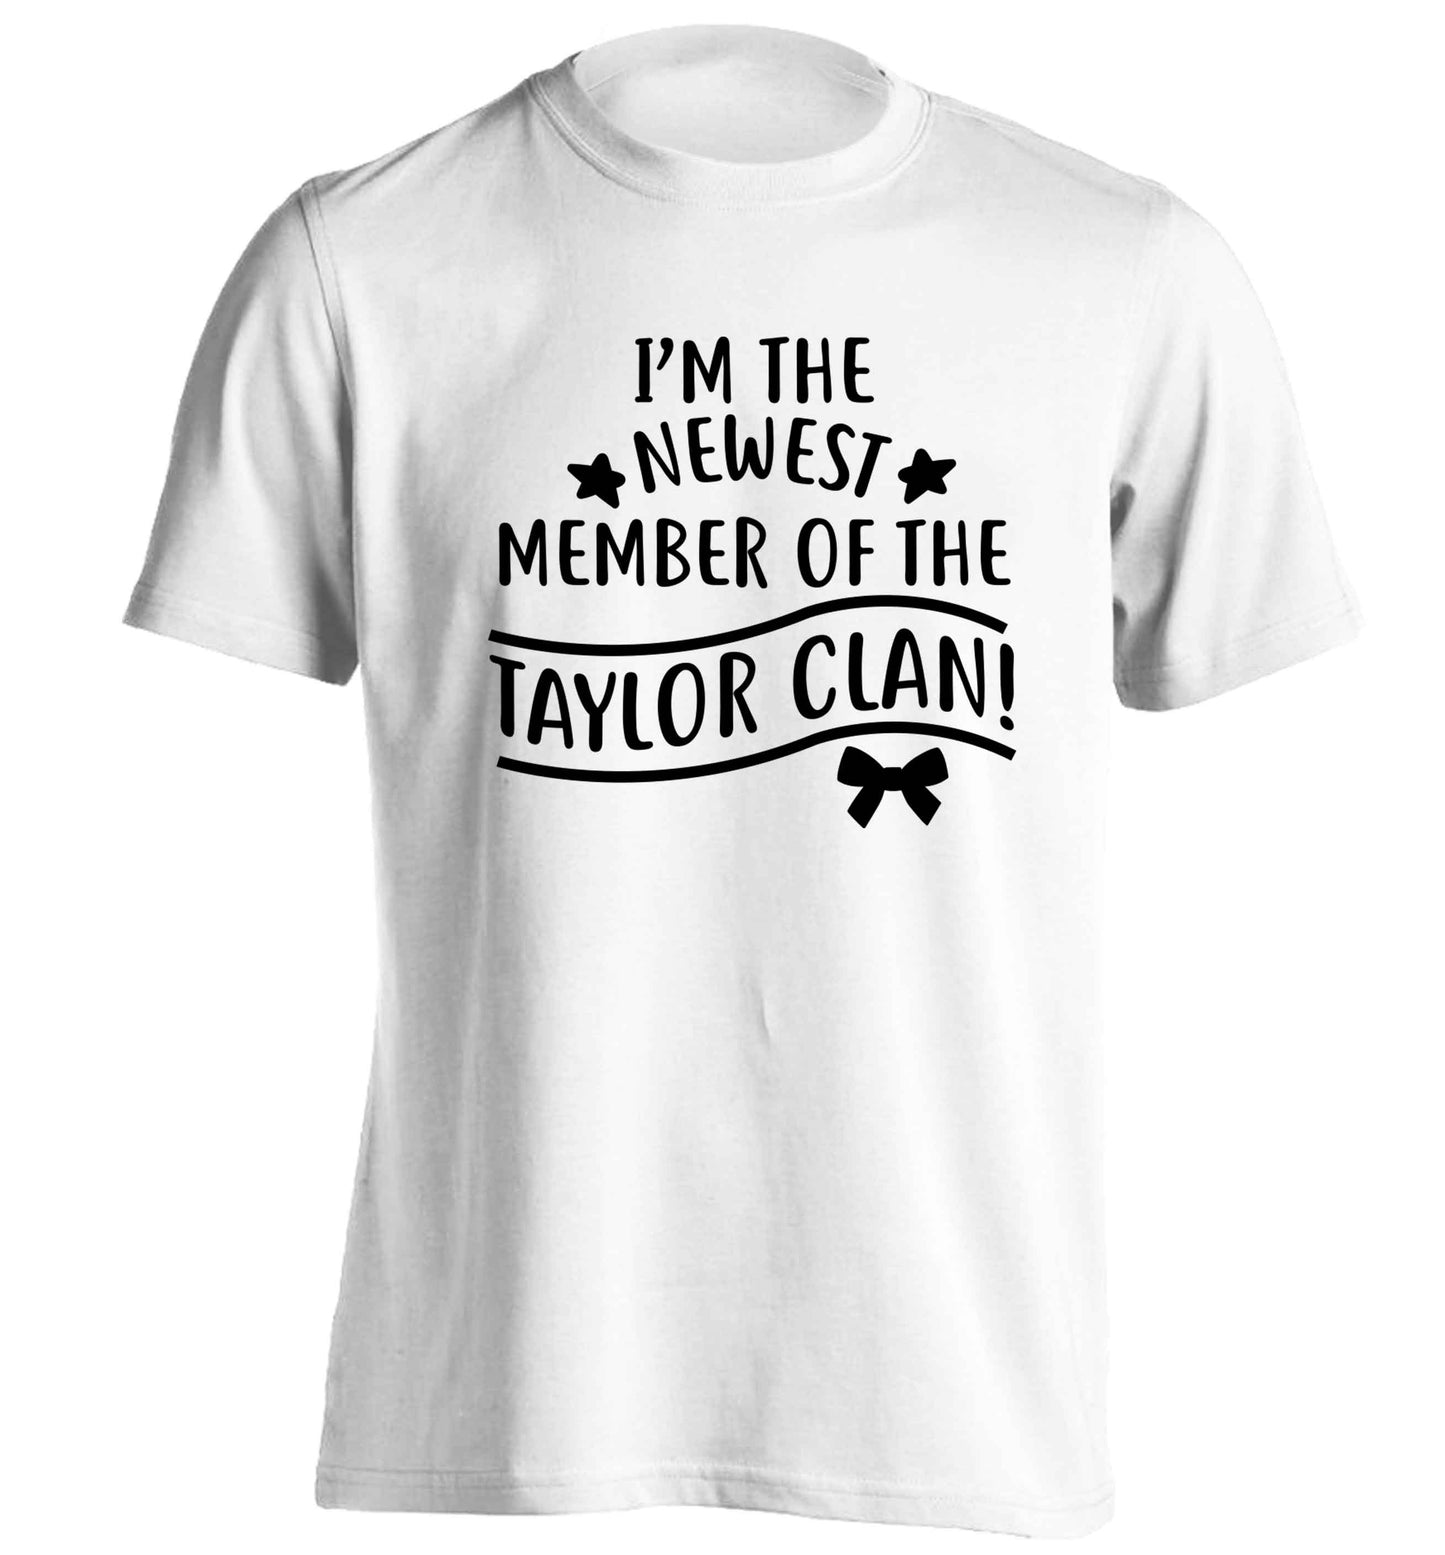 Personalised, newest member of the Taylor clan adults unisex white Tshirt 2XL